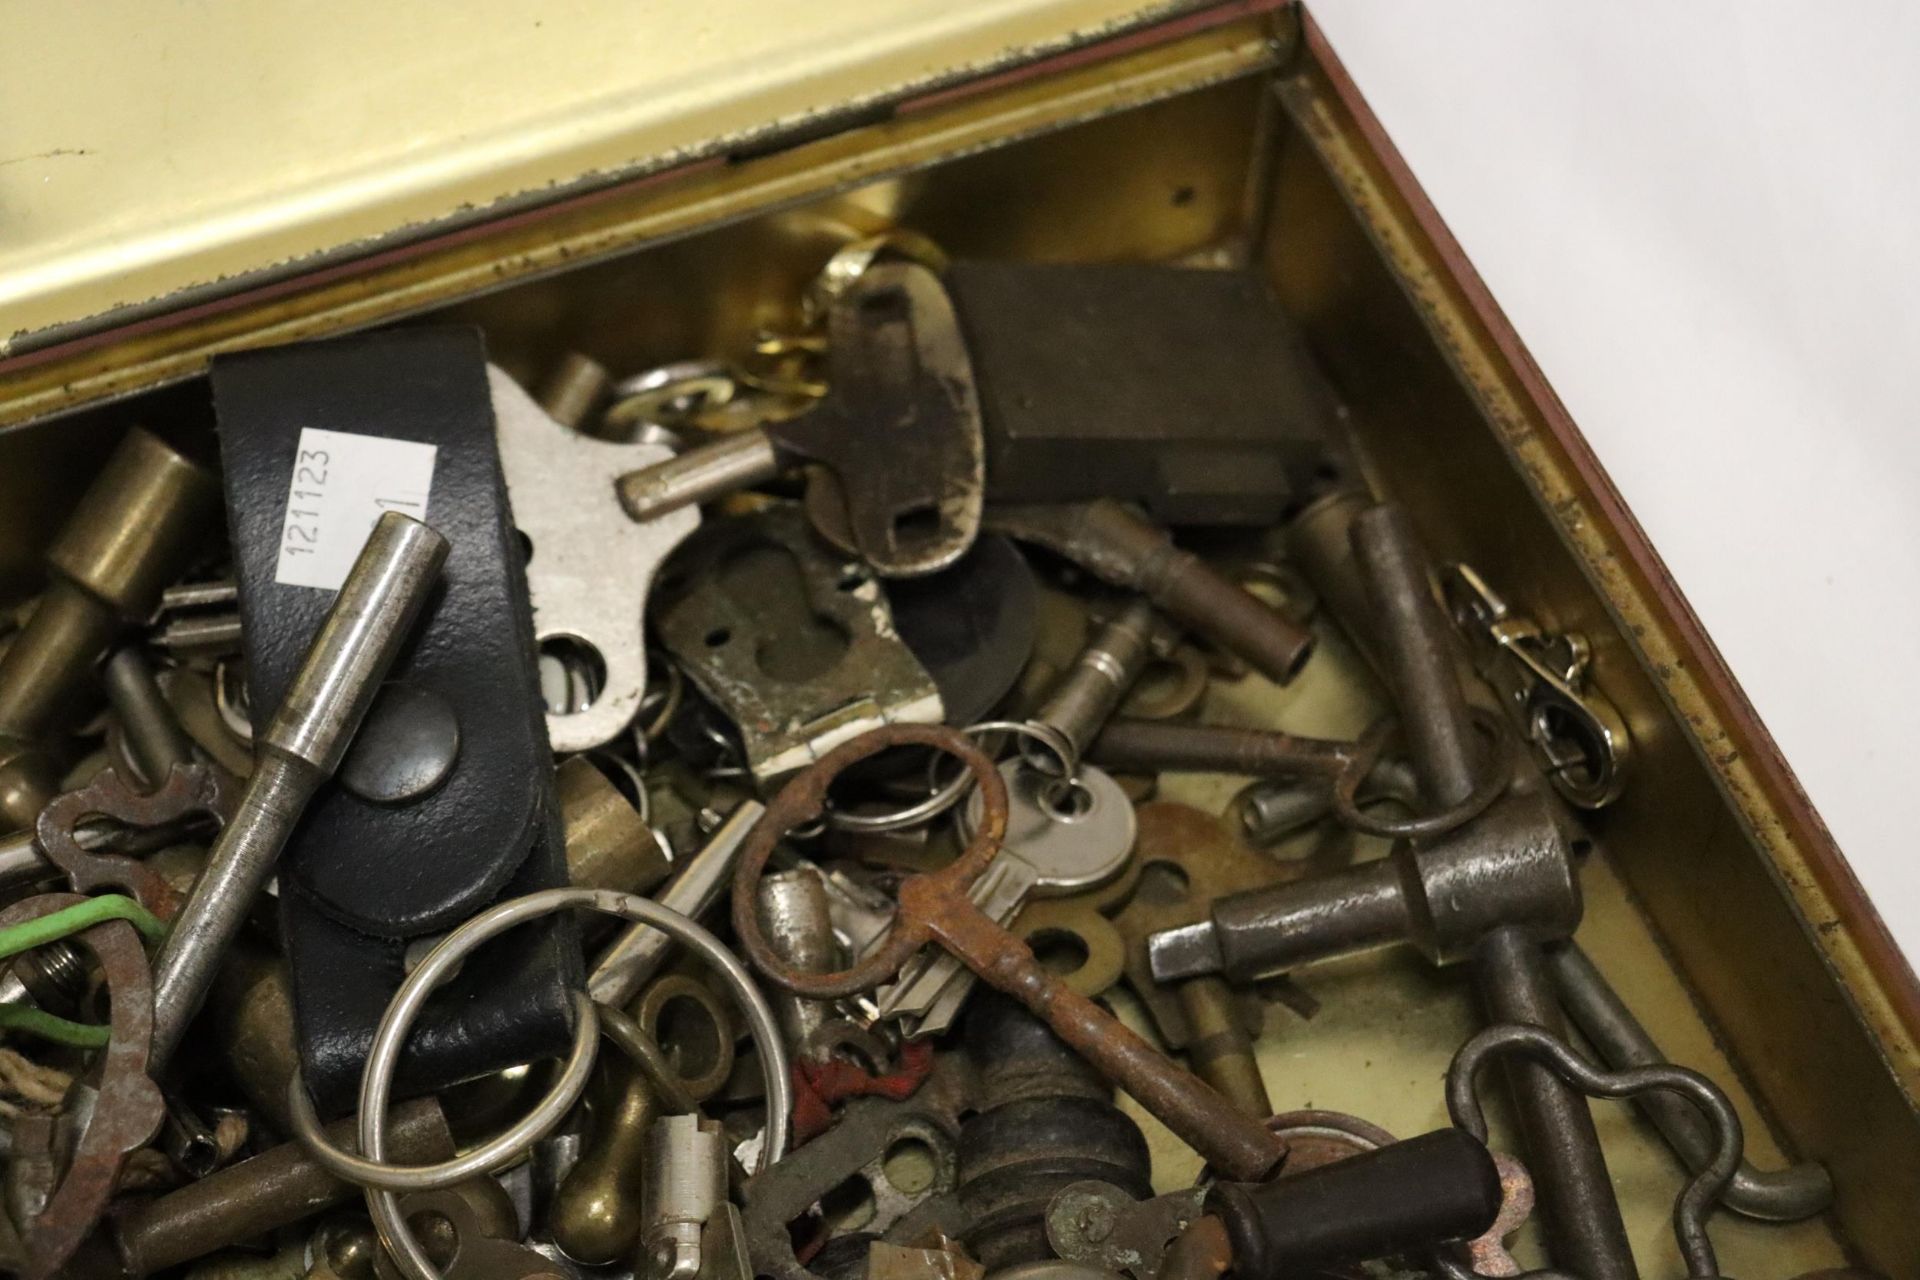 A LARGE QUANTITY OF VINTAGE FURNITURE AND CLOCK KEYS - Image 8 of 10